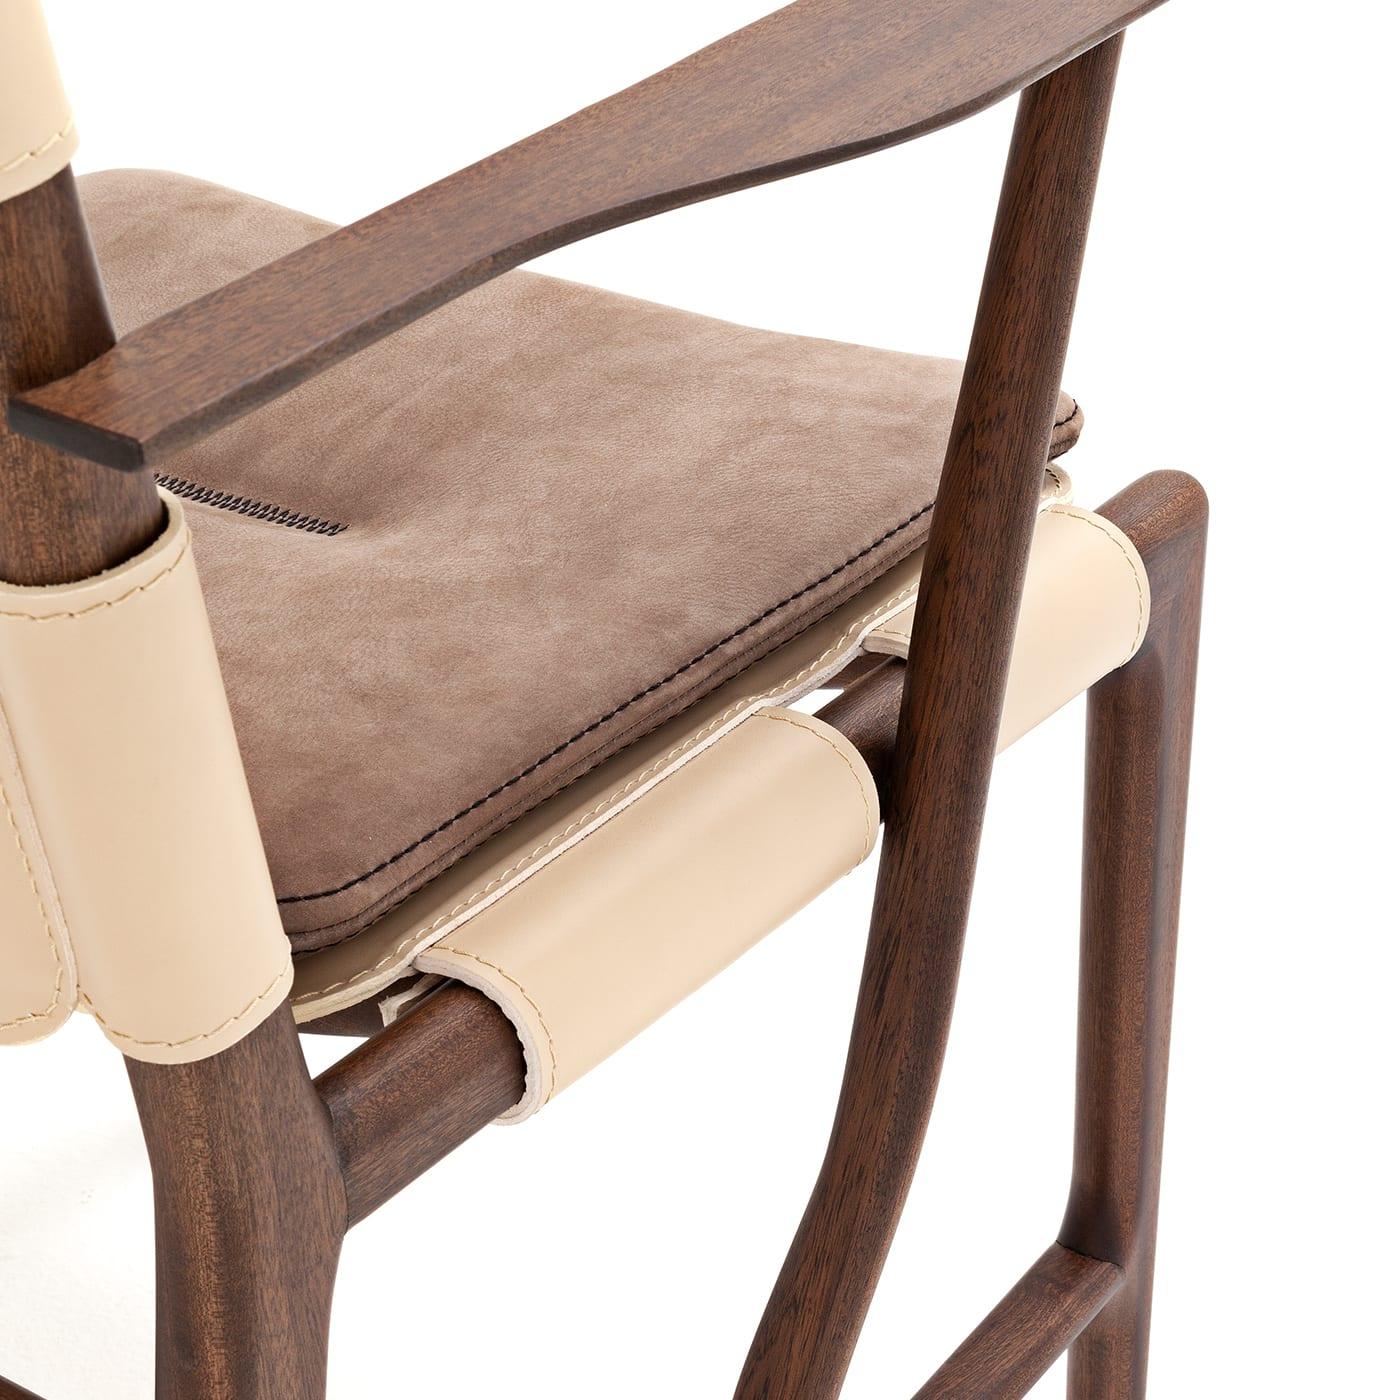 First-rate materials such as saddle leather, mahogany and precious textiles merge in this superb chair with armrests that draws inspiration from nature and tree branches. The backrest is covered with beige saddle leather, while the seat features a